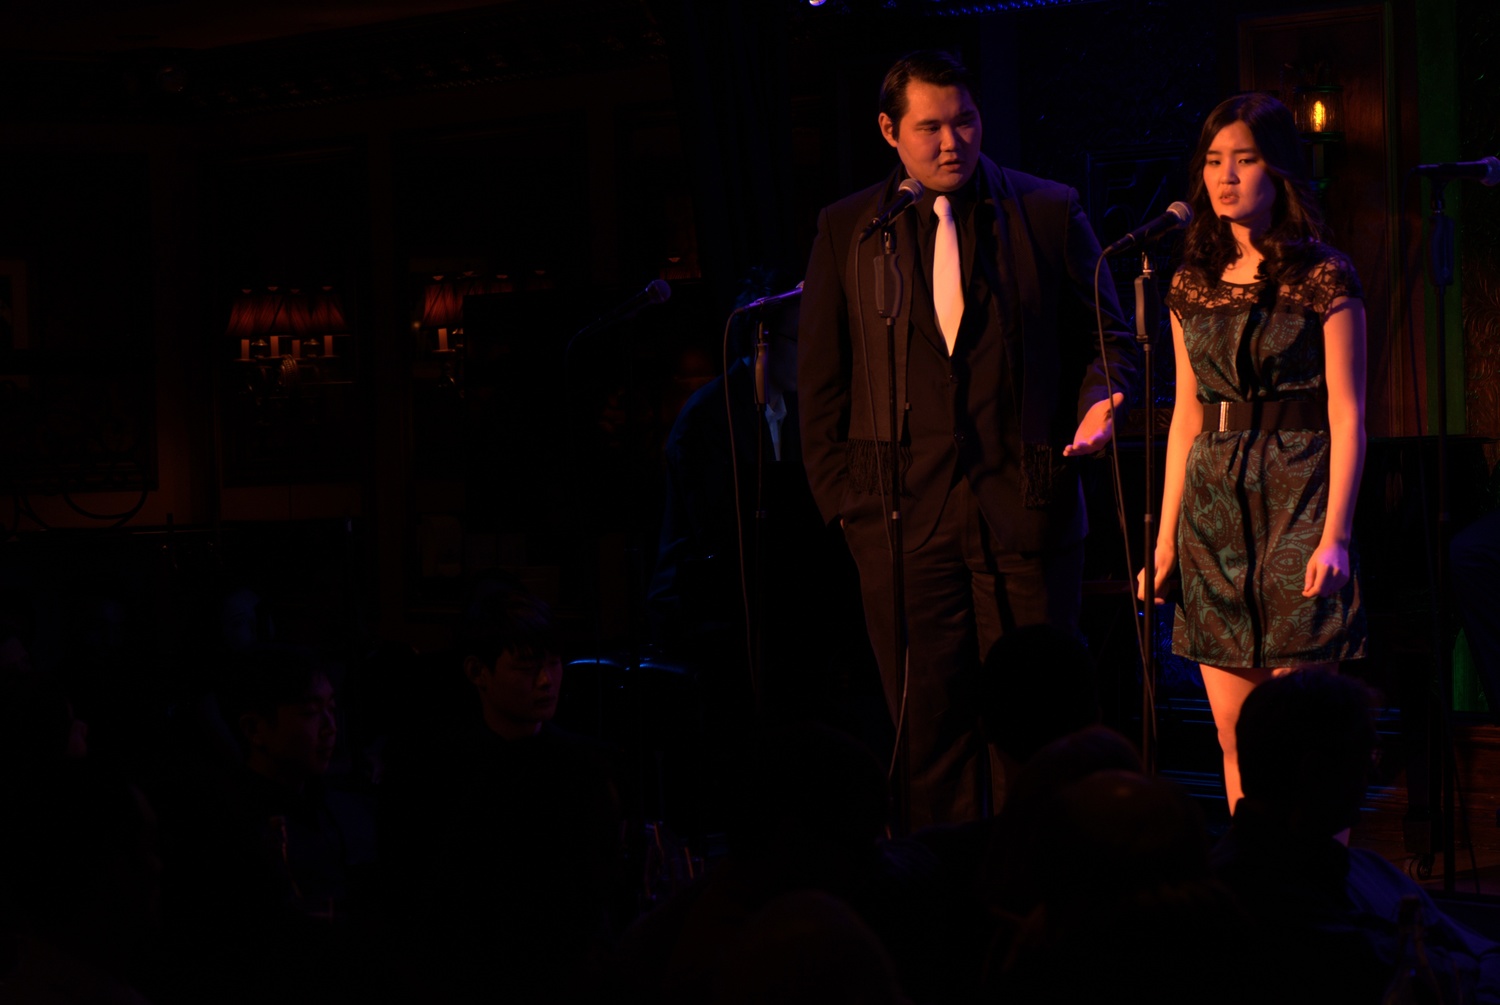 Some of the pictures from 54 Below concert. 3